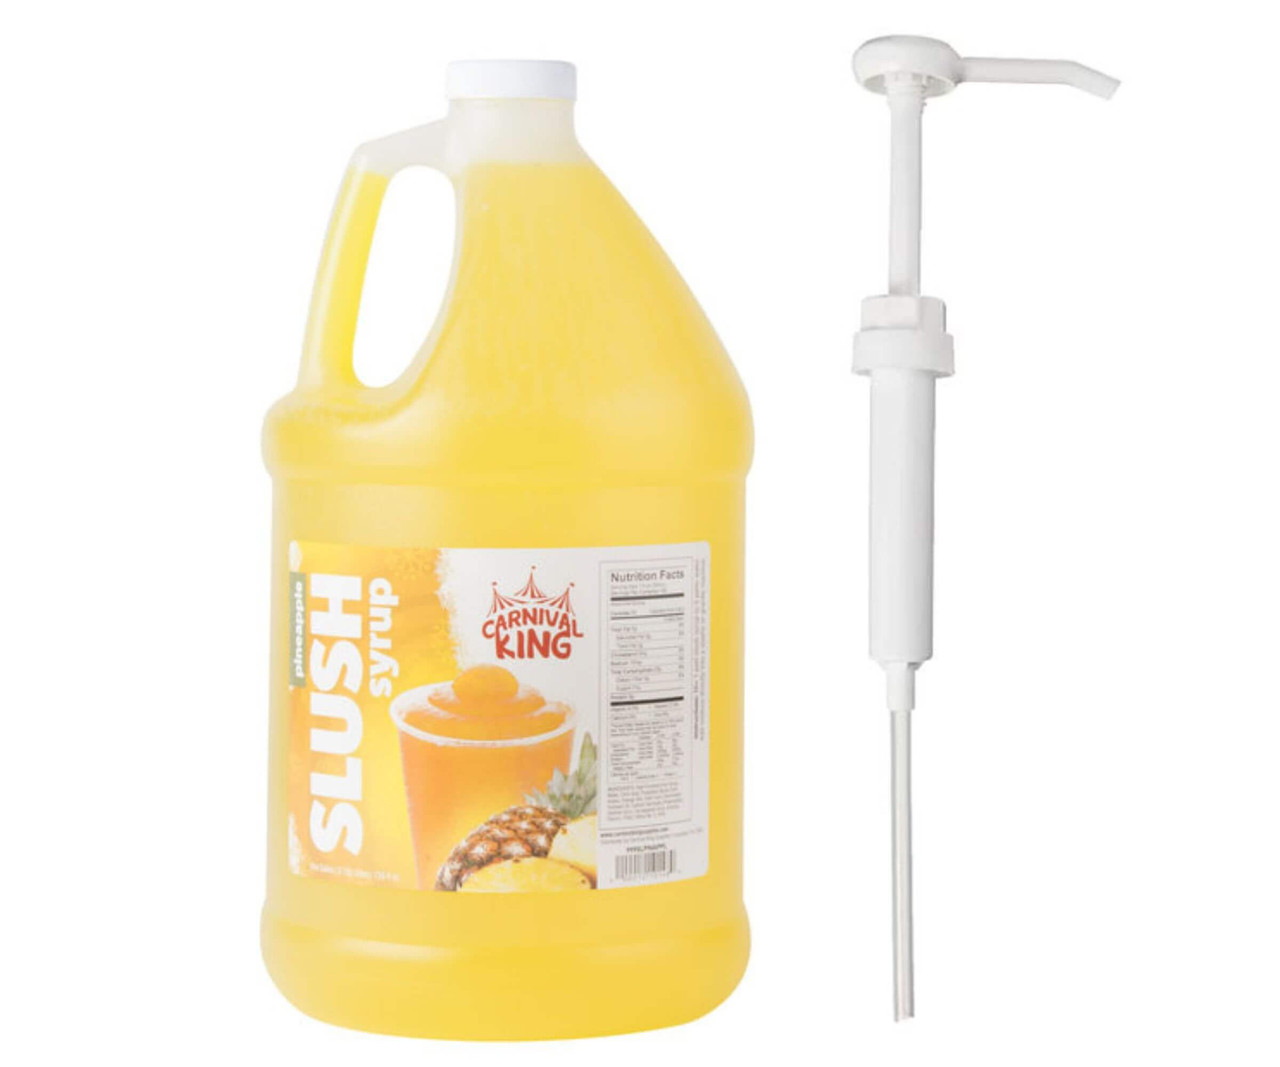 Table Top King Pineapple Slushy Syrup 5:1 Concentrate BONUS Squeeze Pump